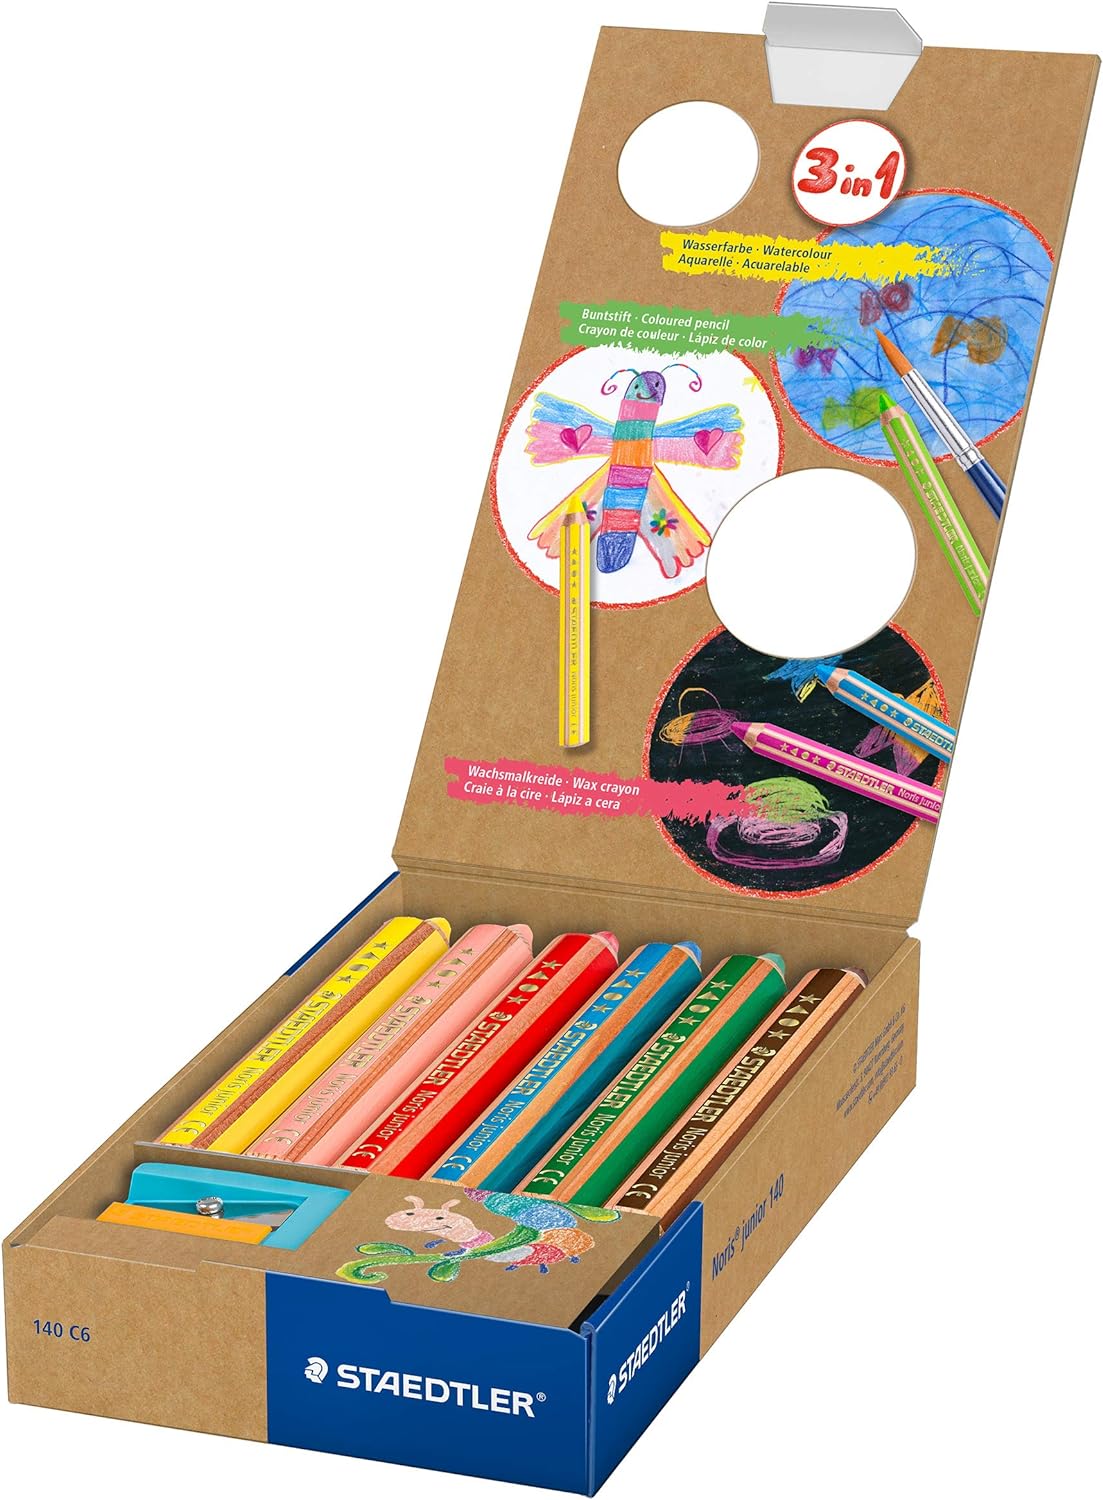 Large 3-in-1 Colouring Pencil 6 colours + sharpener, staedtler 140, upcycled wood, open box with pencils and sharpener